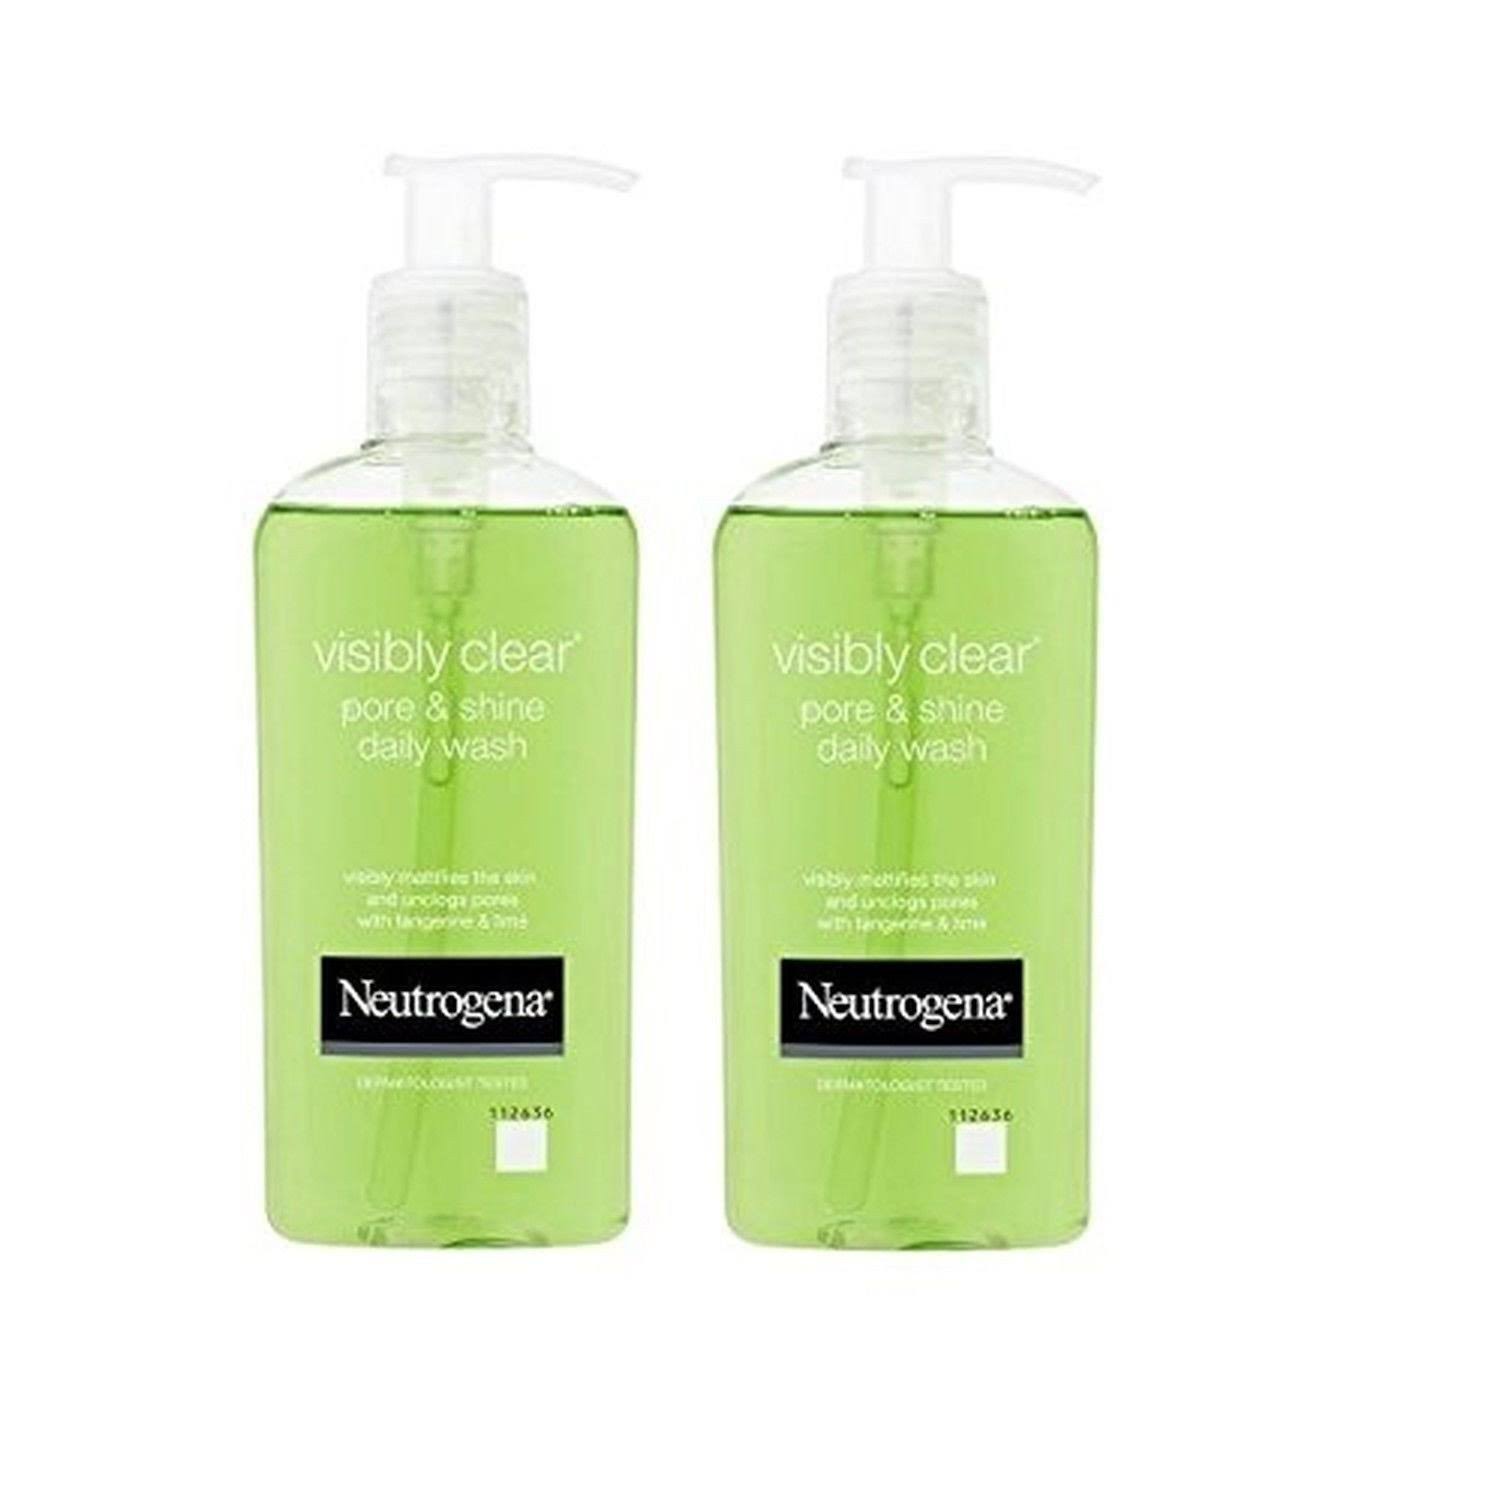 Neutrogena Visibly Clear Pore and Shine Daily Face Wash - Lime and Tangerine, 200ml